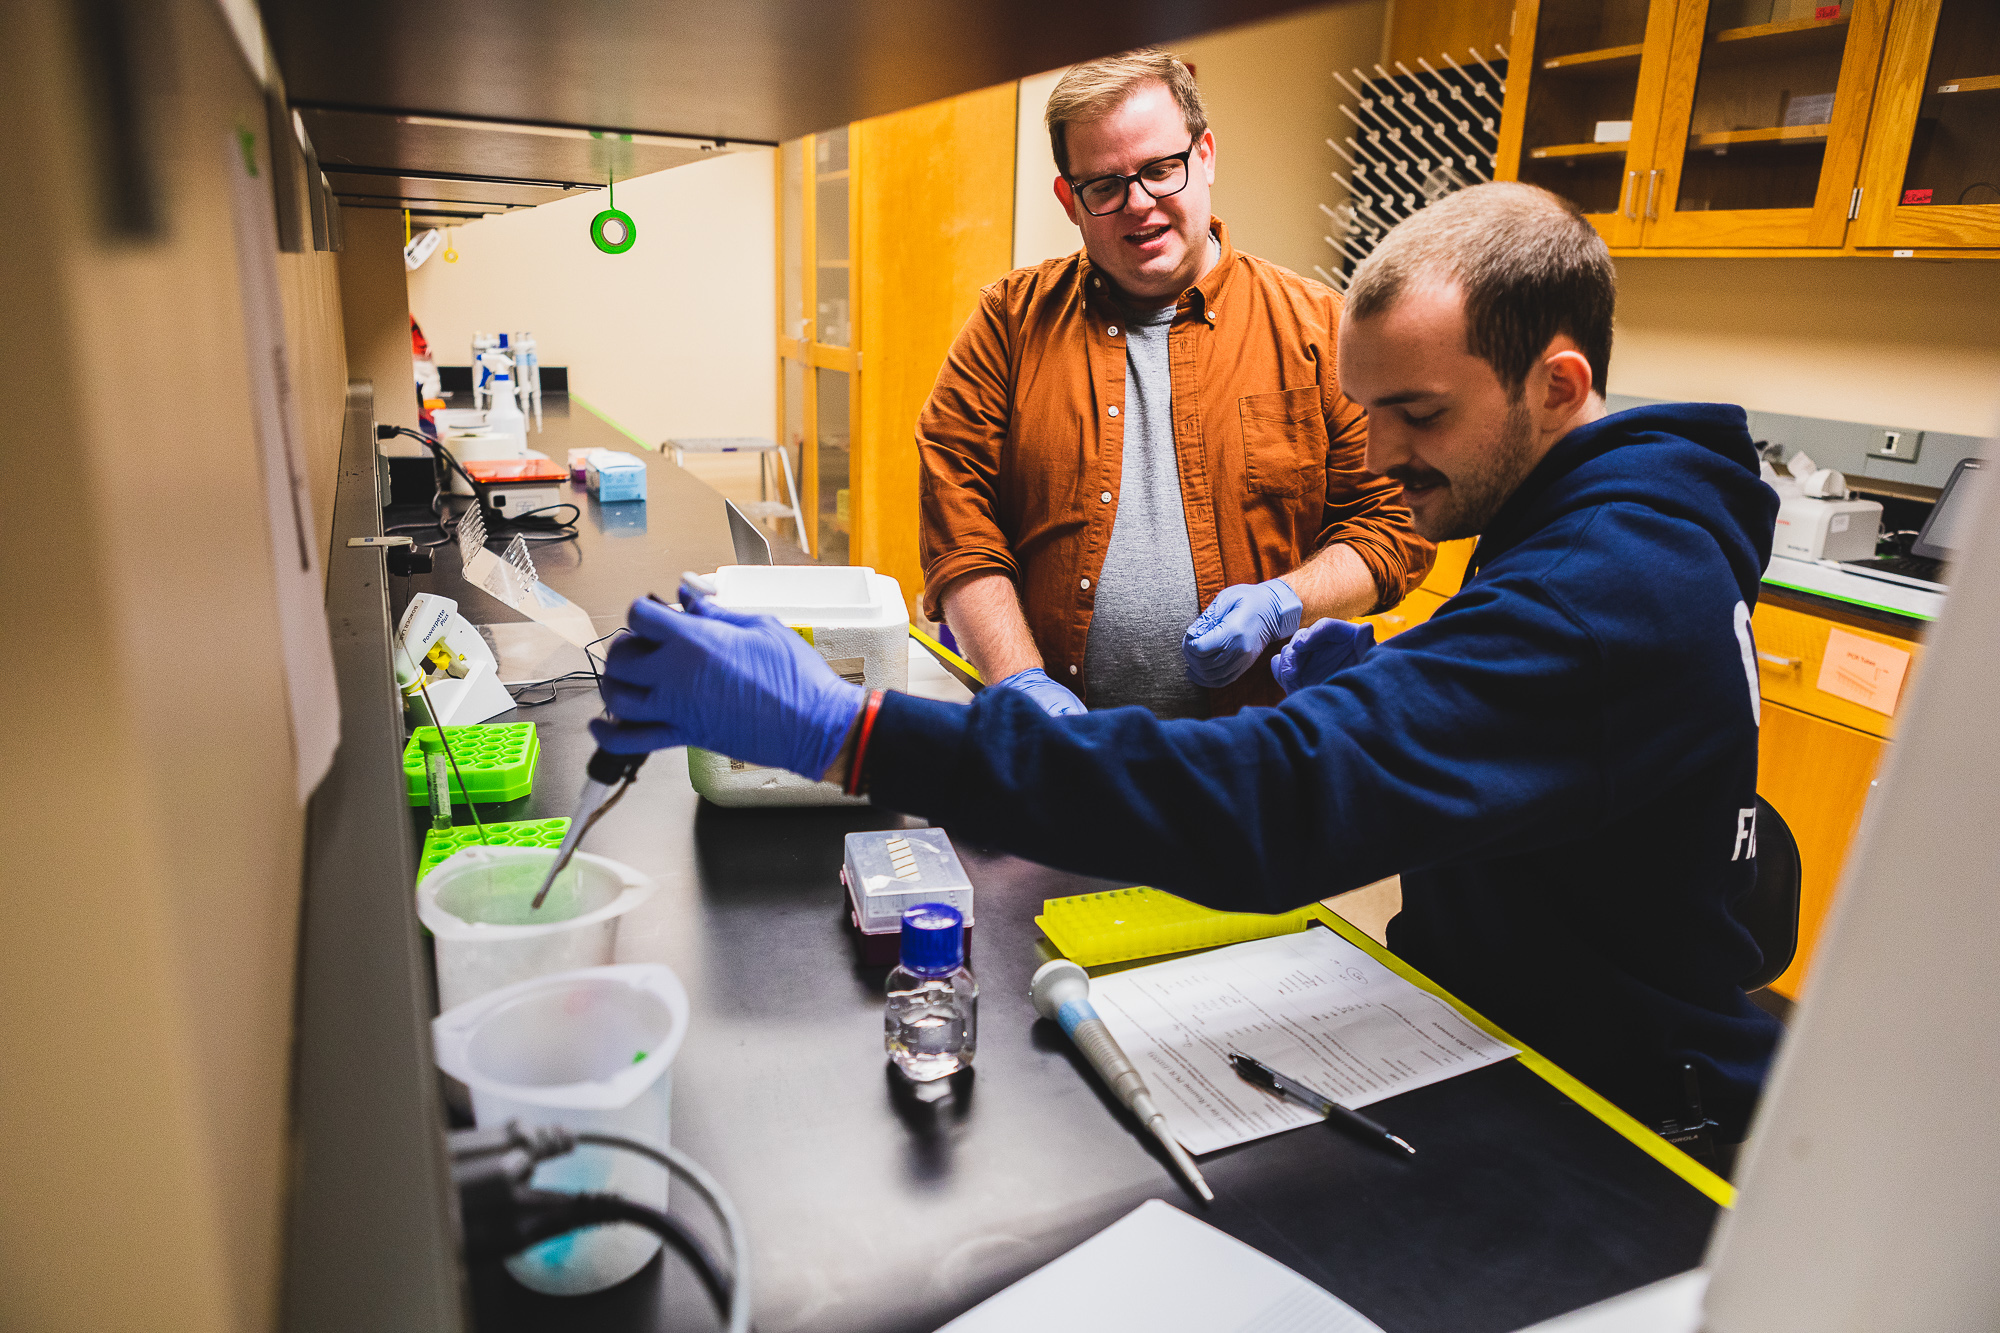 Dane Bowder&comma; PhD&comma; at left&comma; is joined by senior biology major&comma; Sean Hummel